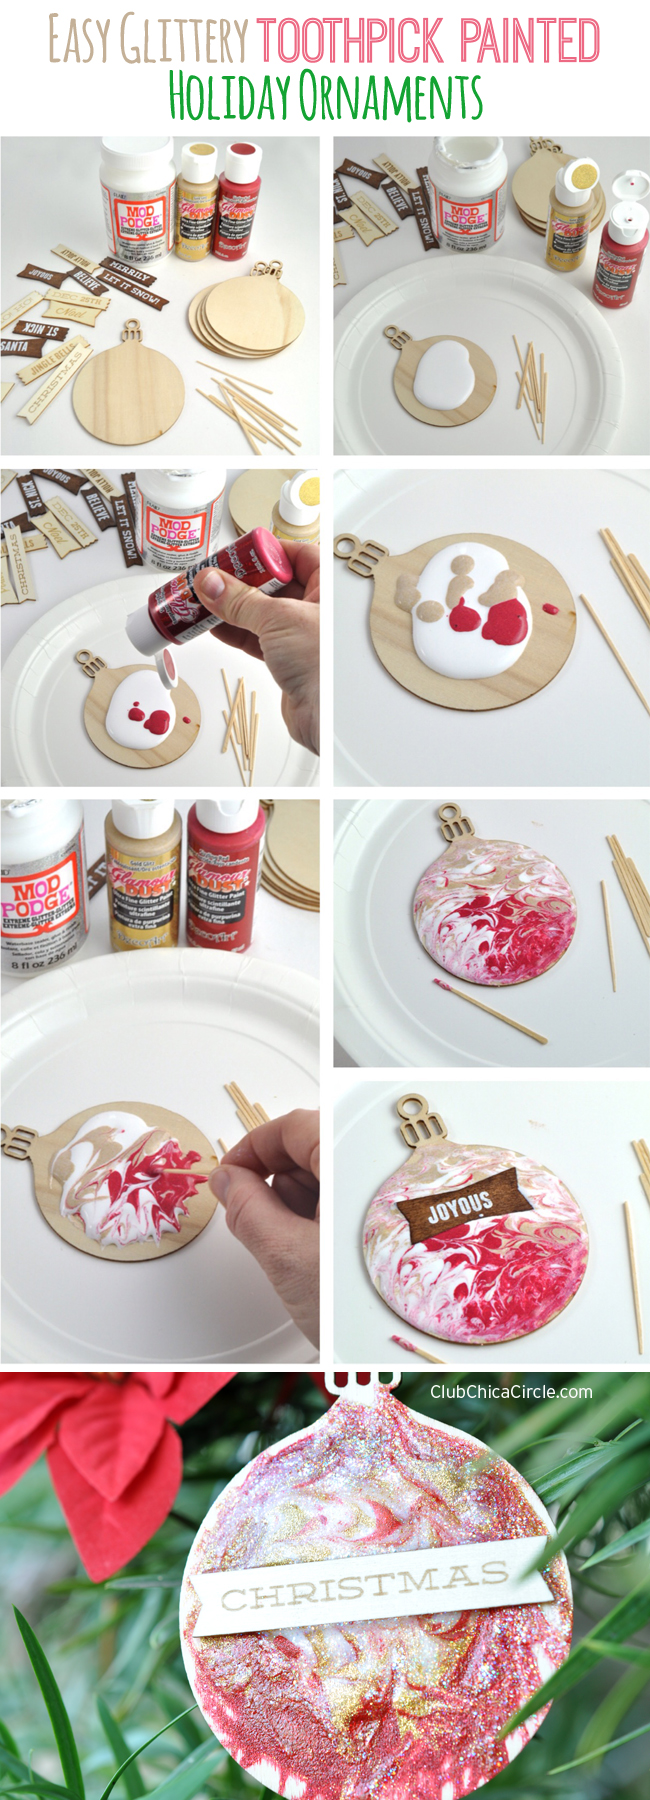 Easy Glittery Toothpick Painted Holiday Ornaments DIY